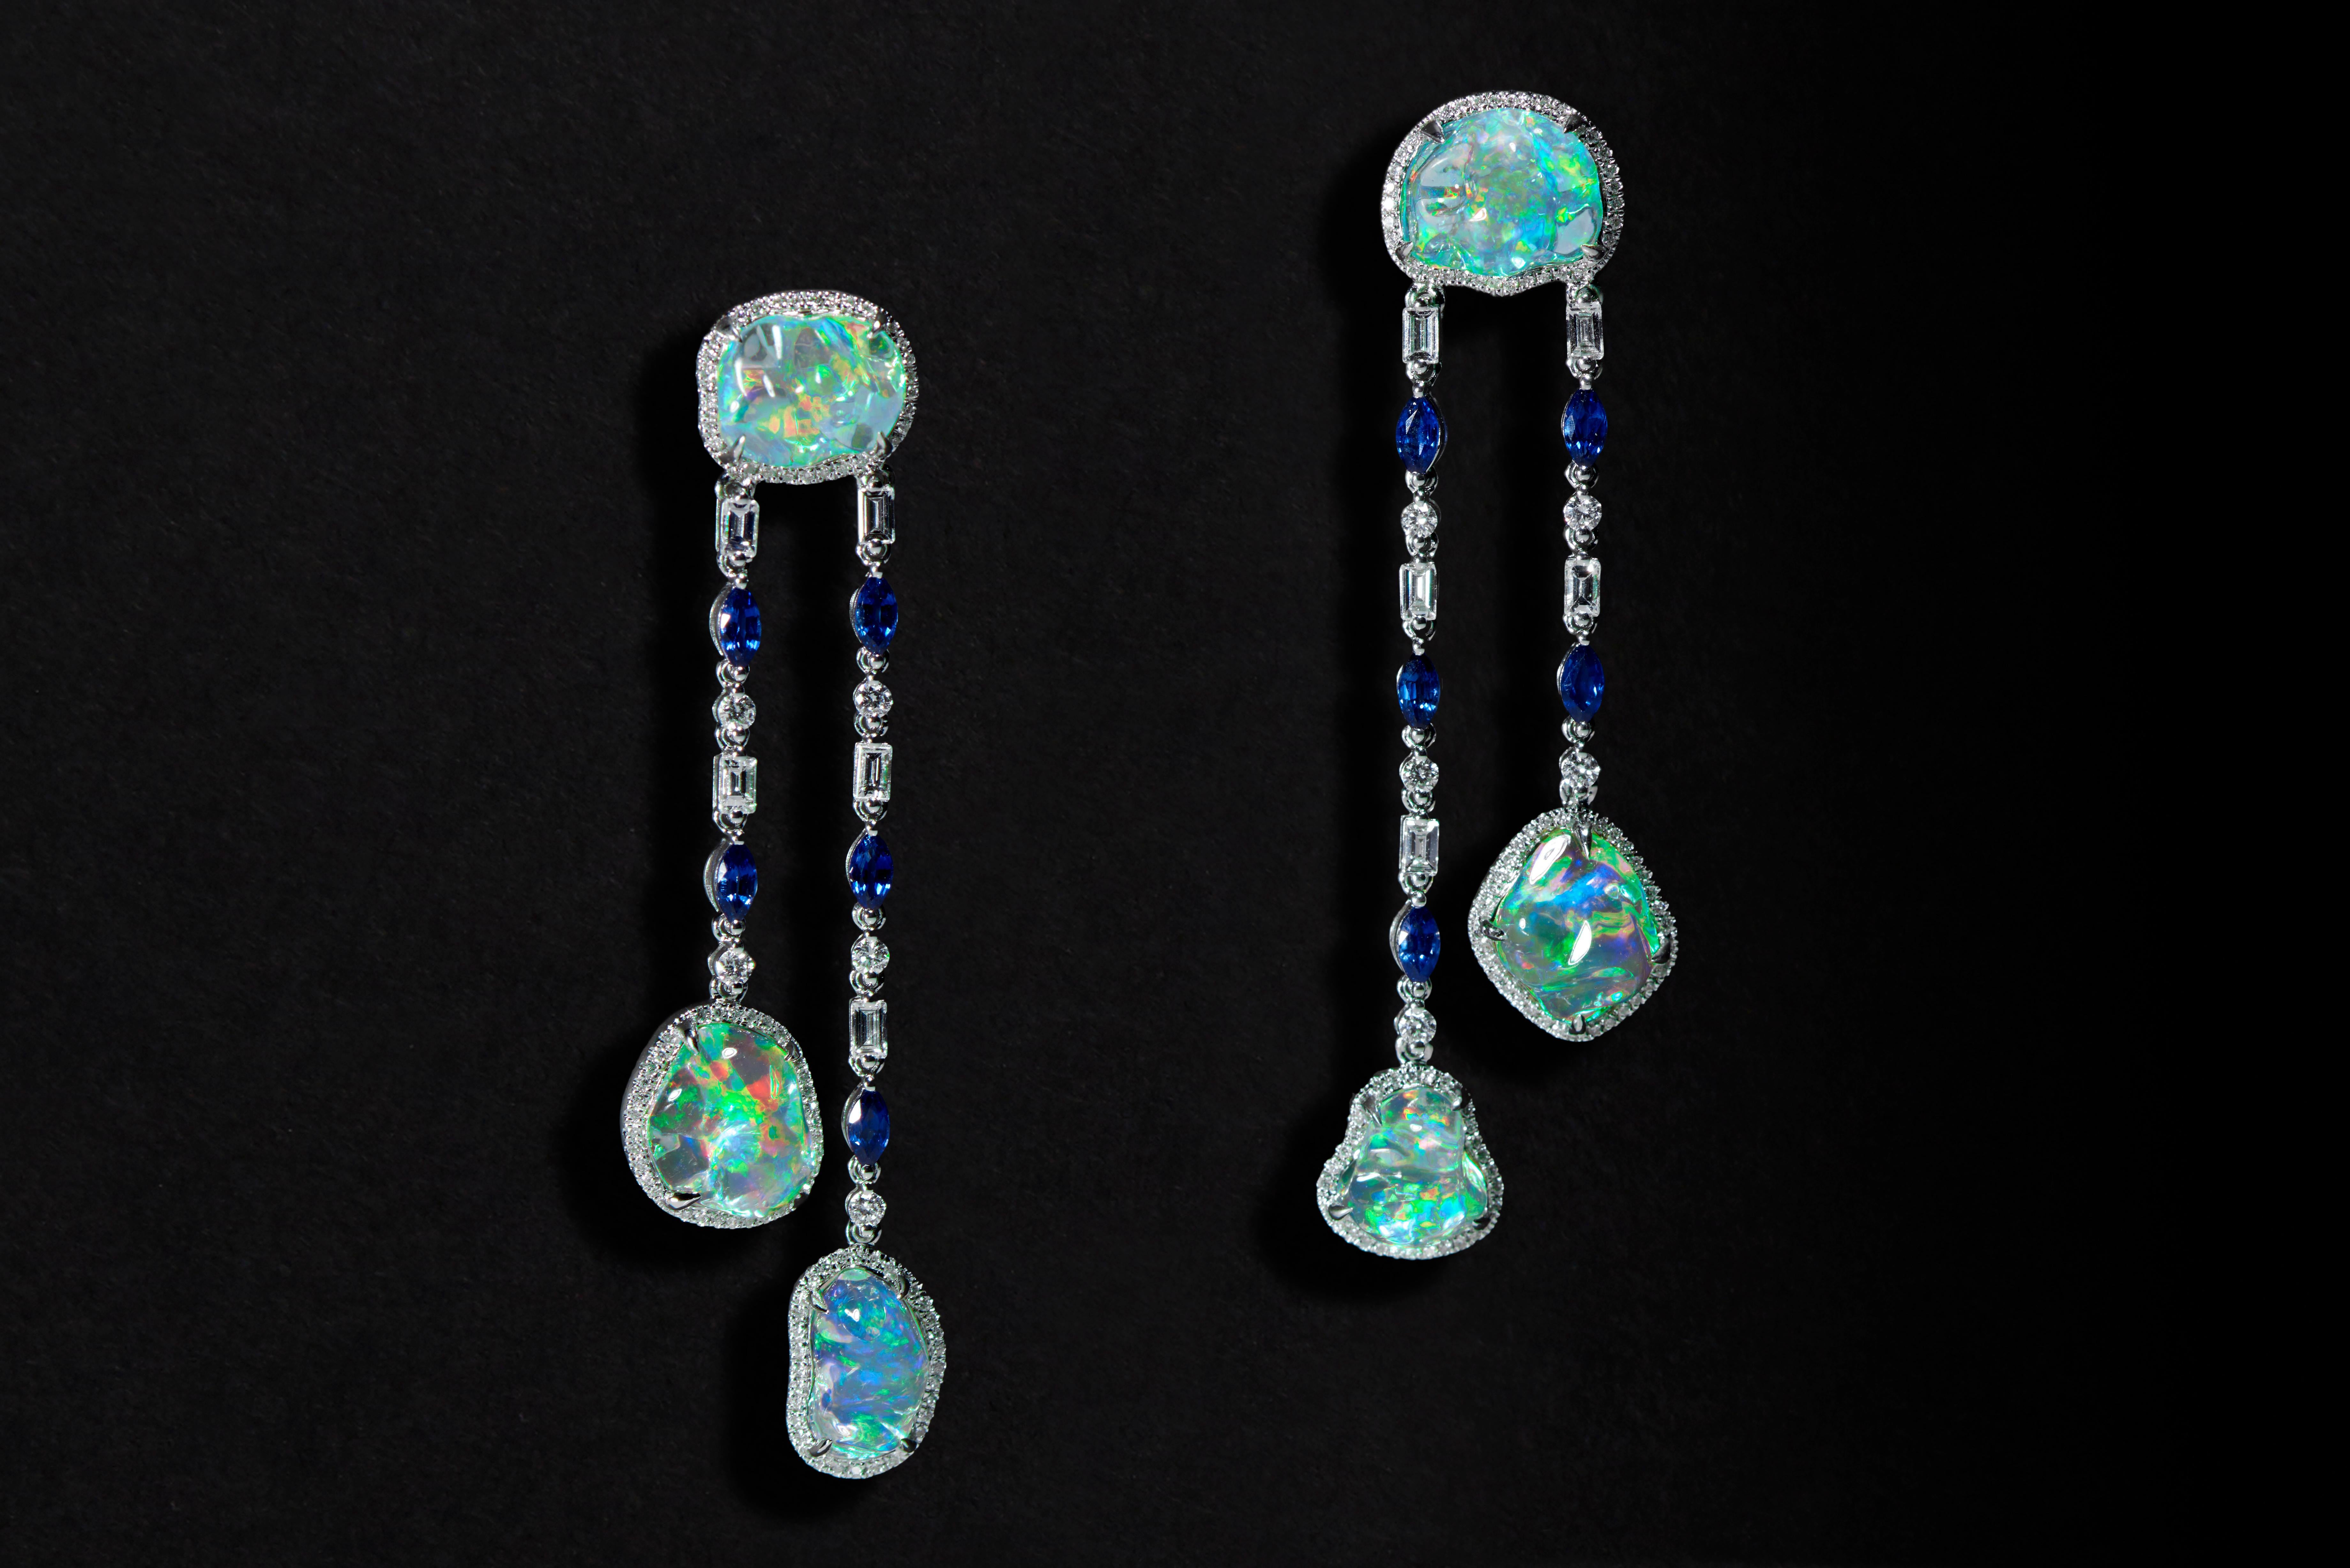 Bursting with saturated colors, the ethereal Ice drops Clear Fire Opal Blue Sapphire and Diamond Earrings highlight the natural beauty of gemstones and showcase an innate sense of contemporary fashion thinking. Dangling from a sinuous round top, two